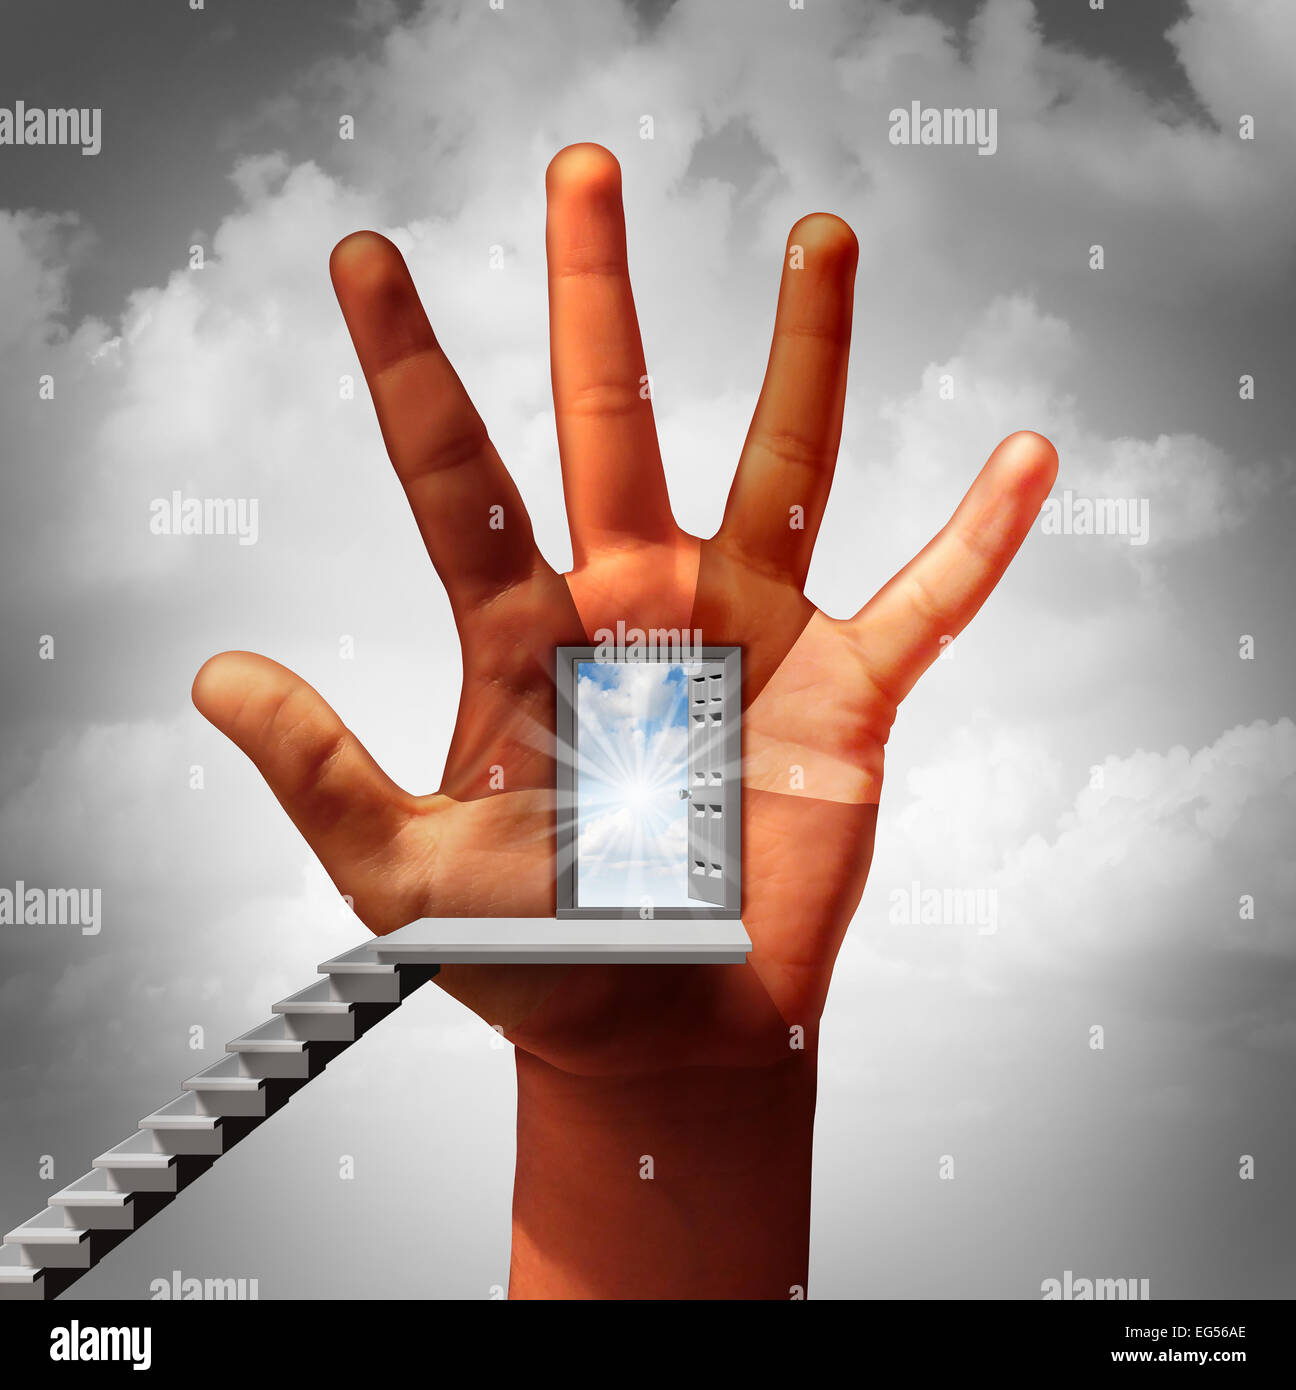 Equal opportunity and work equality business concept as an open door on a human hand with fingers representing diverse multicultural people as a metaphor for fighting discrimination in the workplace. Stock Photo